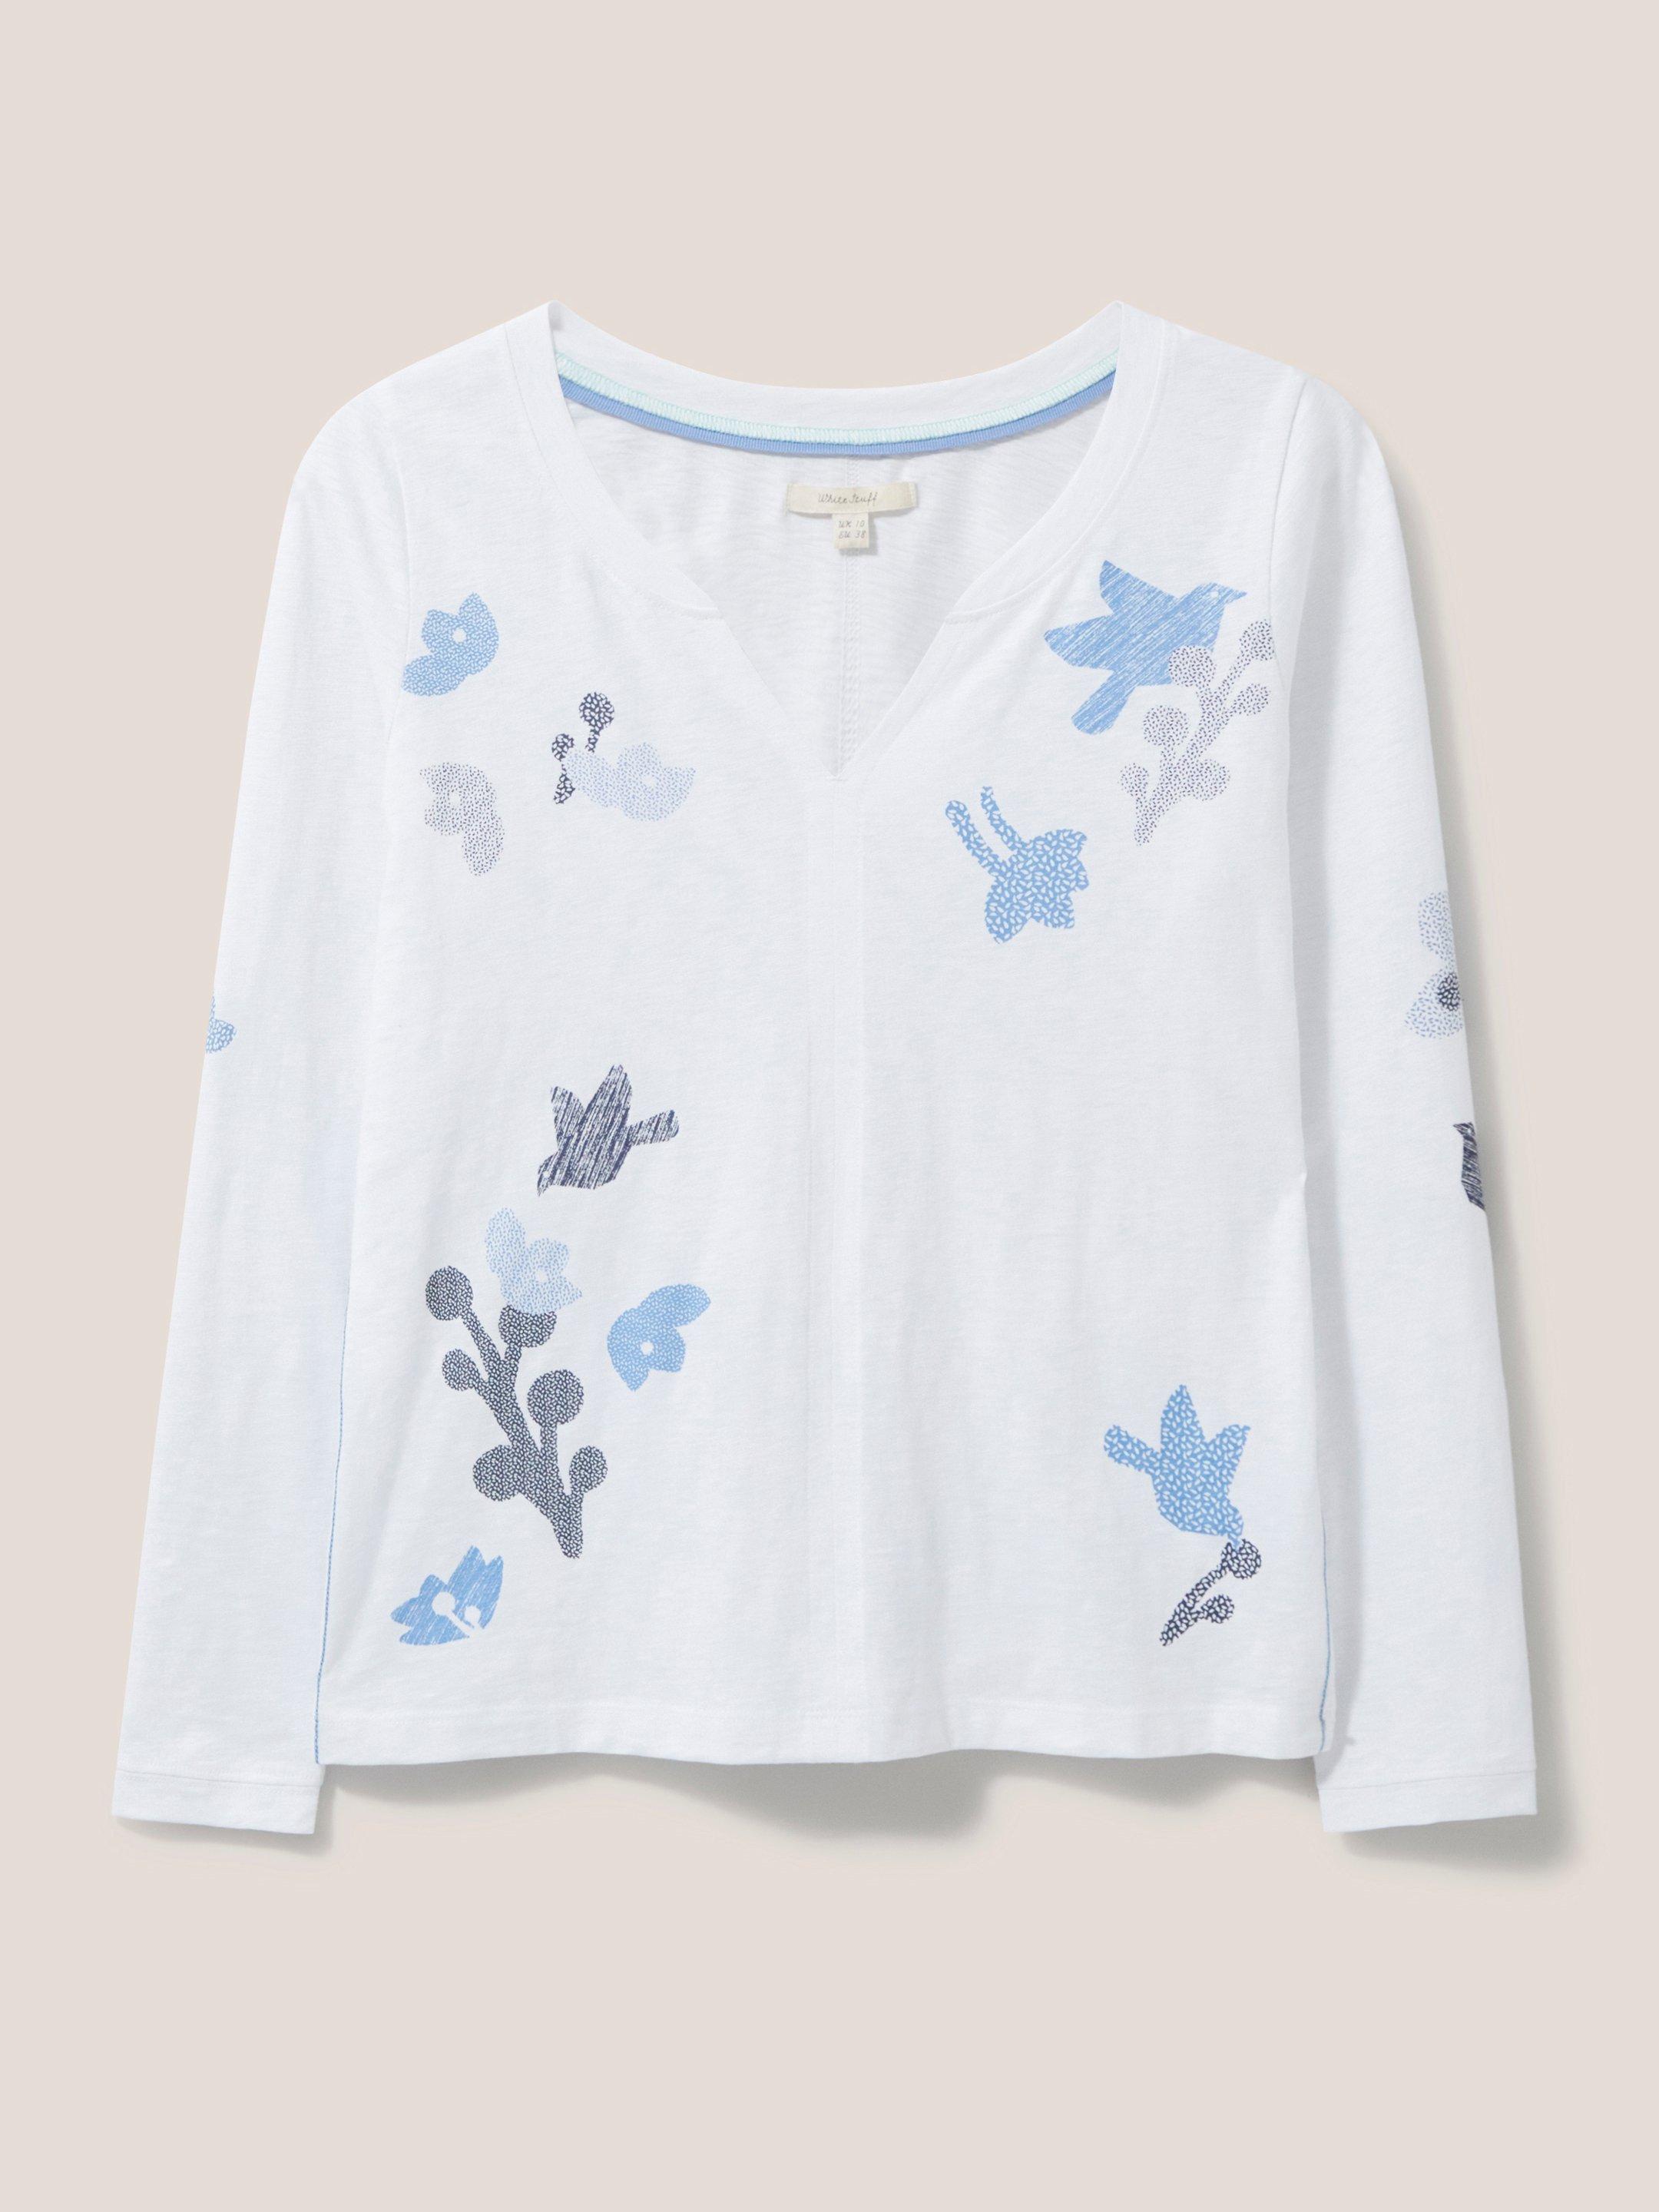 Nelly LS Tee in WHITE PR - FLAT FRONT